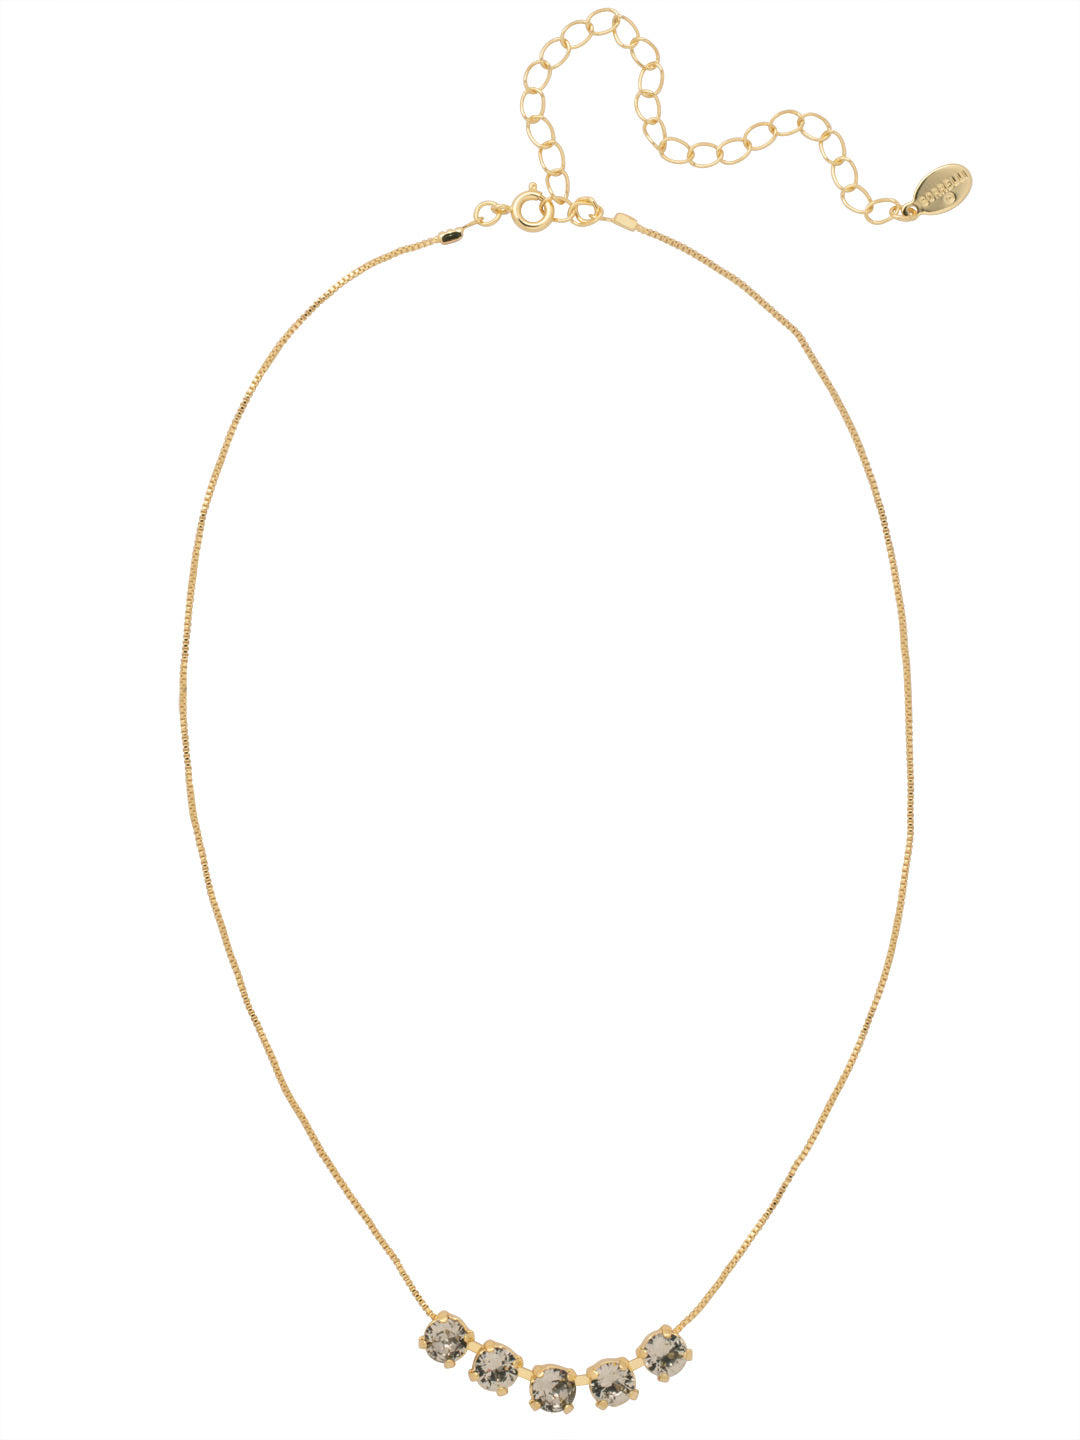 Shaughna Tennis Necklace - NFC84BGBD - <p>The Shaughna Tennis Necklace features five crystals on a delicate adjustable chain. From Sorrelli's Black Diamond collection in our Bright Gold-tone finish.</p>